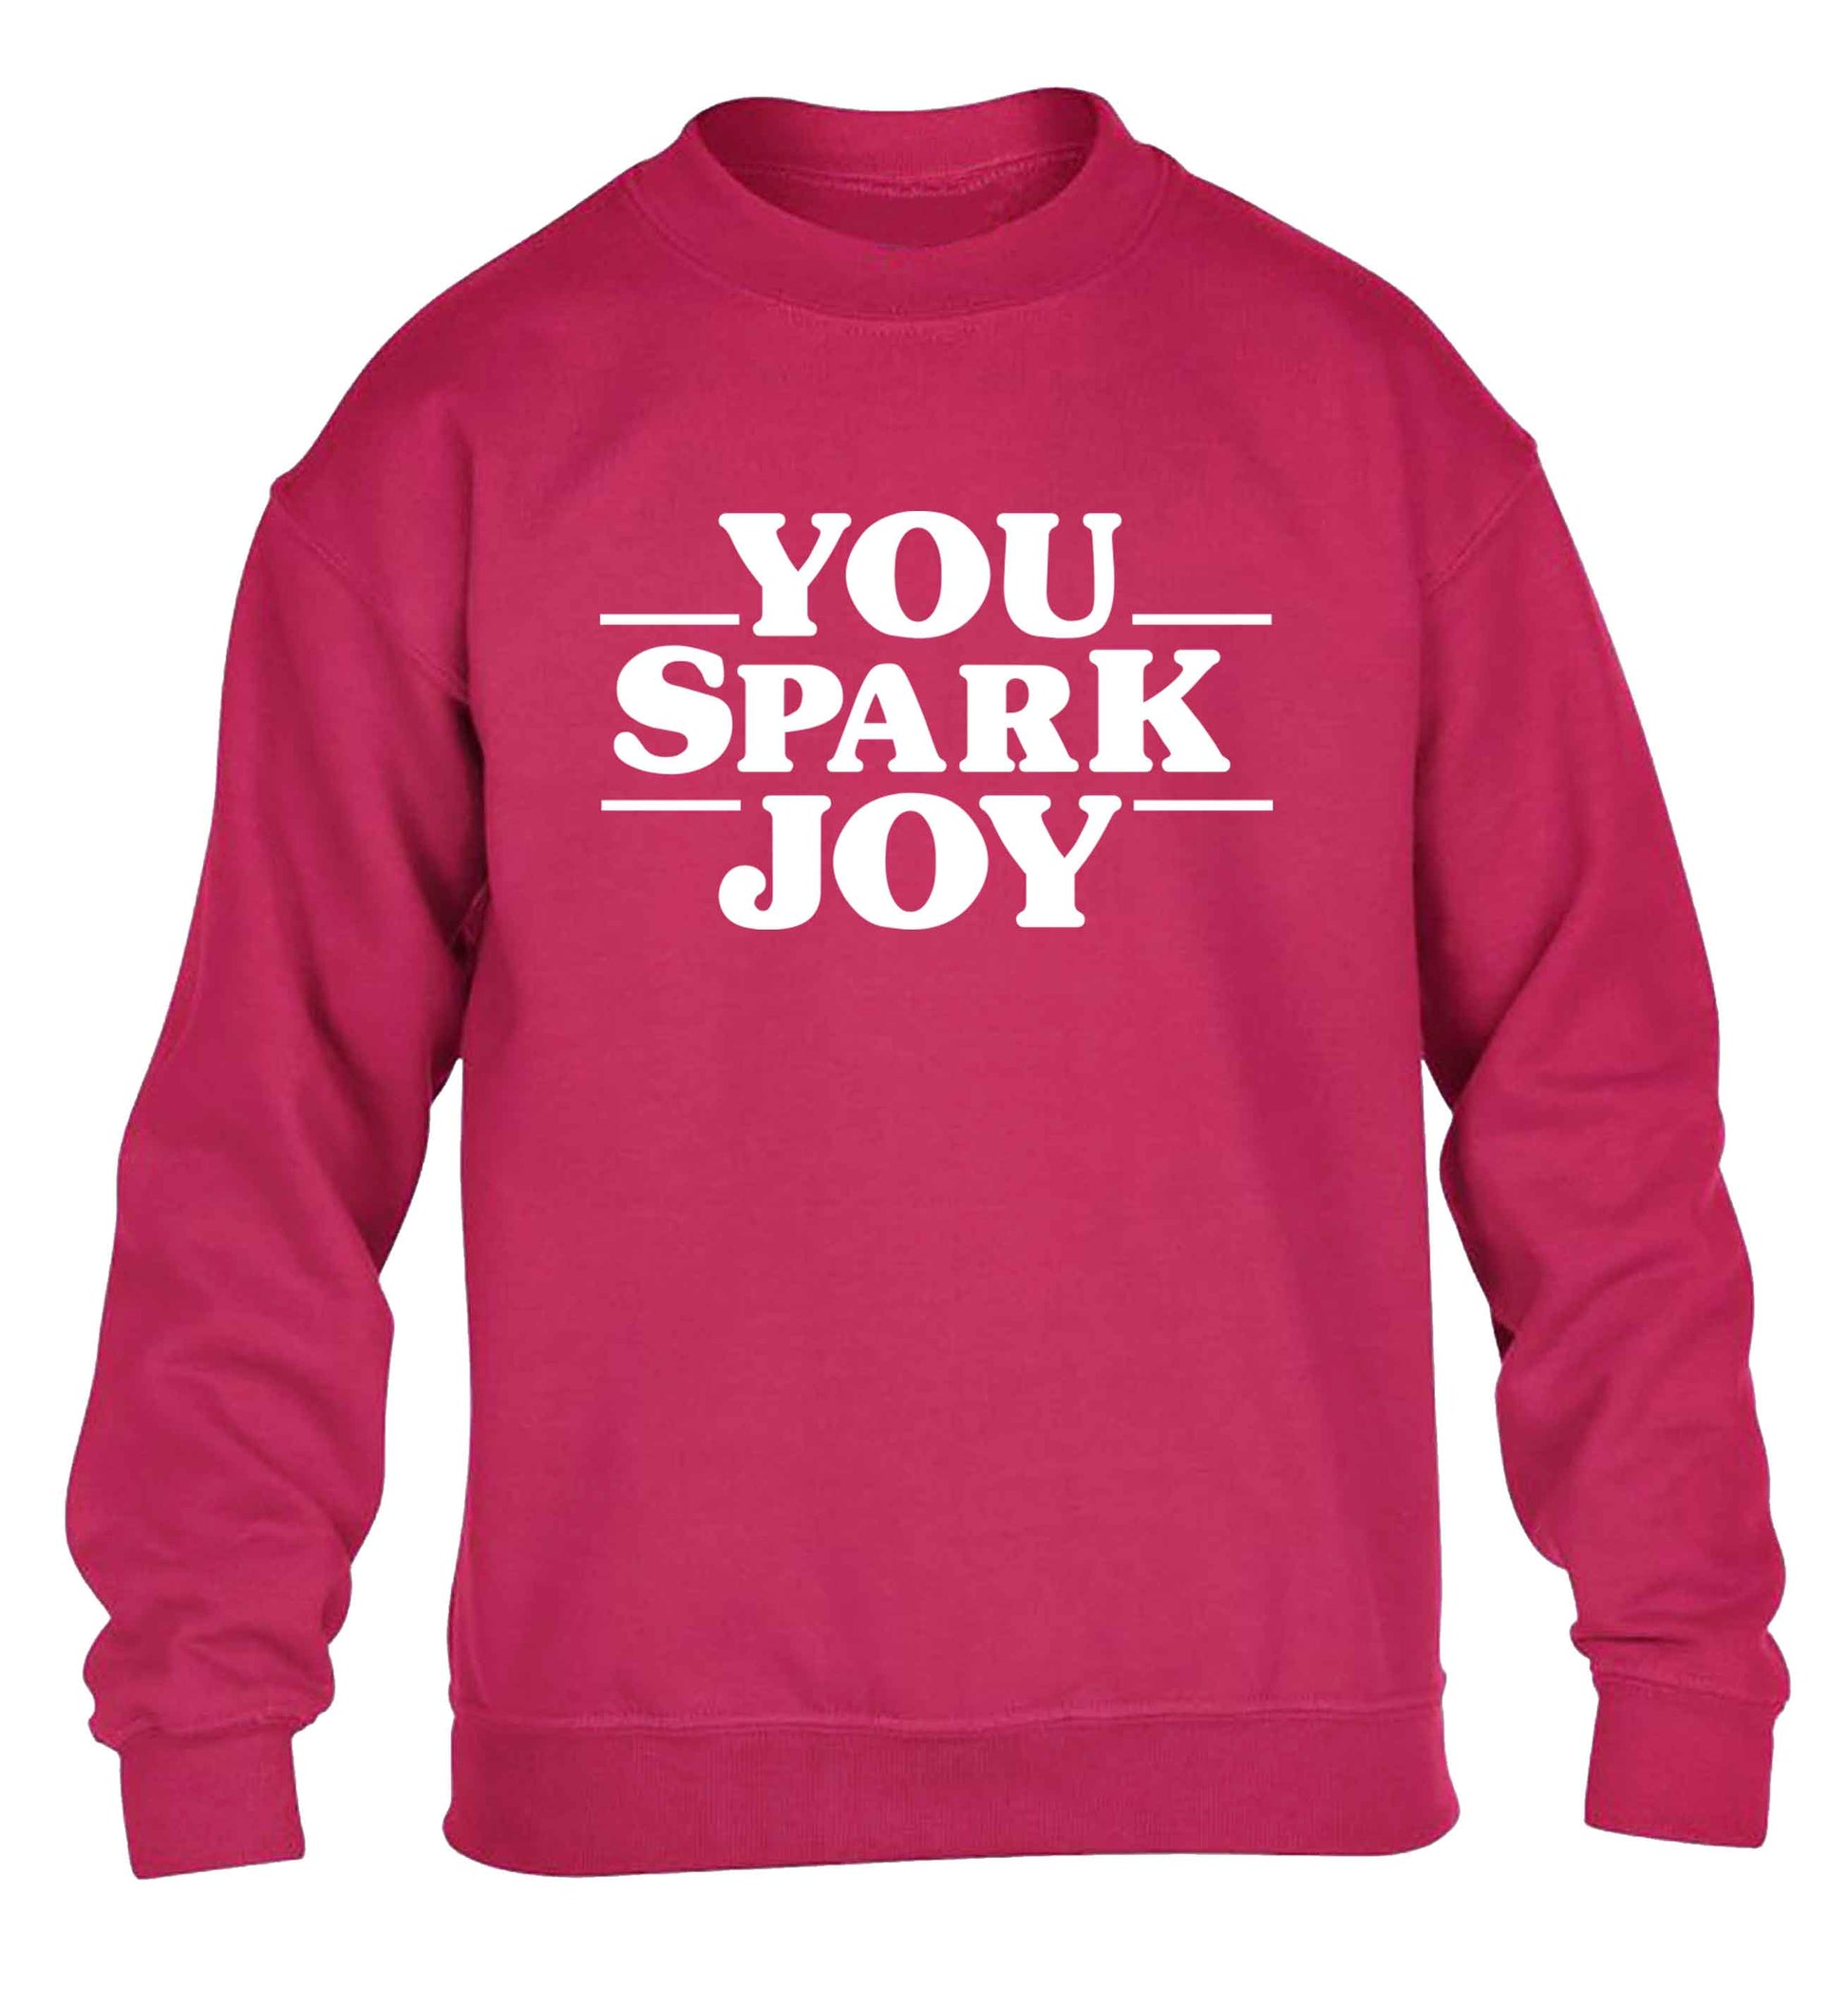 You spark joy children's pink sweater 12-13 Years